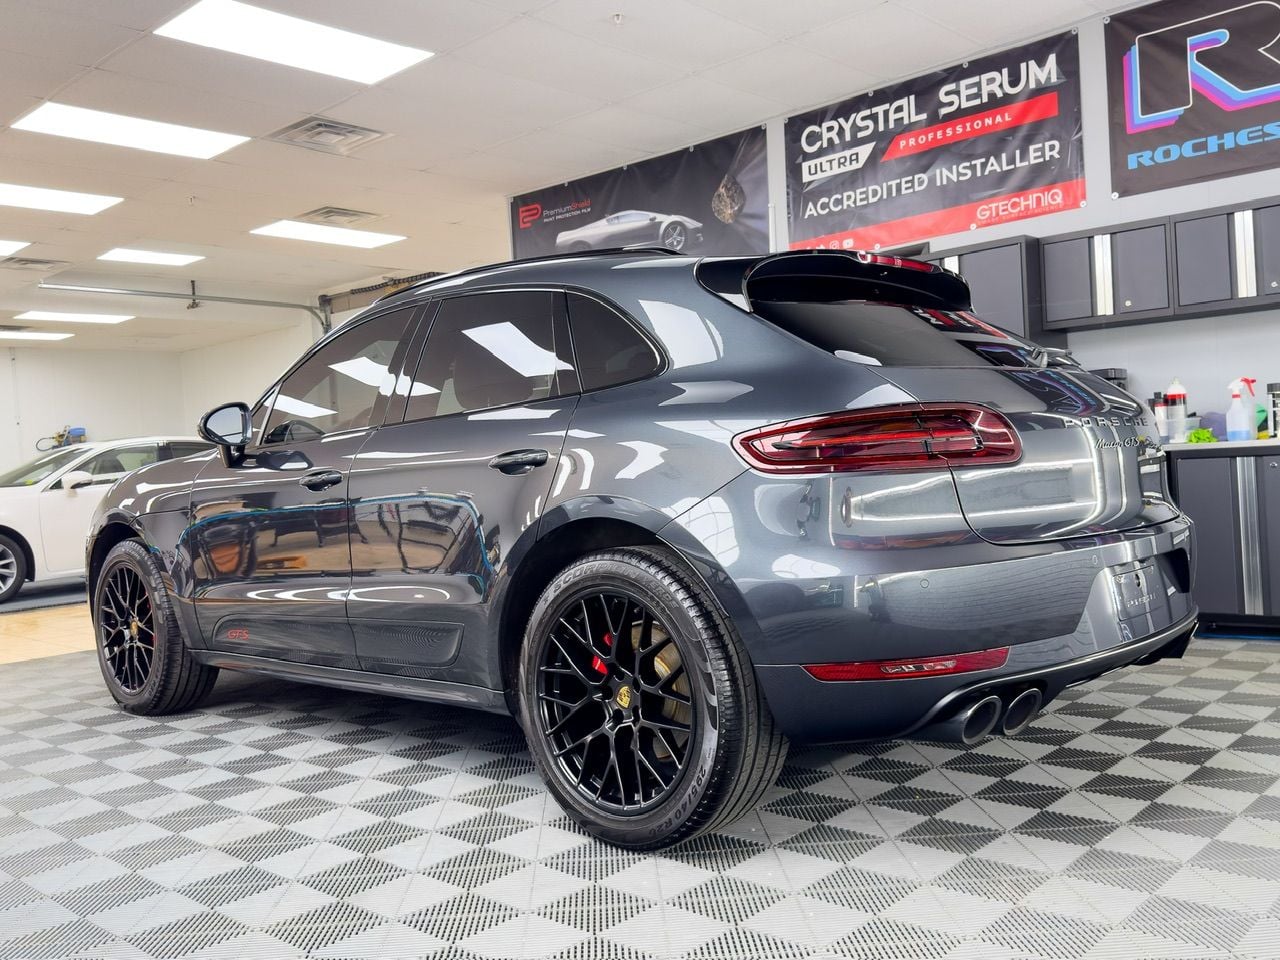 2018 Porsche Macan - 2018 Porsche Macan GTS - Used - VIN WP1AG2A50JLB64983 - 44,682 Miles - 6 cyl - AWD - Automatic - SUV - Gray - Macedon, NY 14502, United States